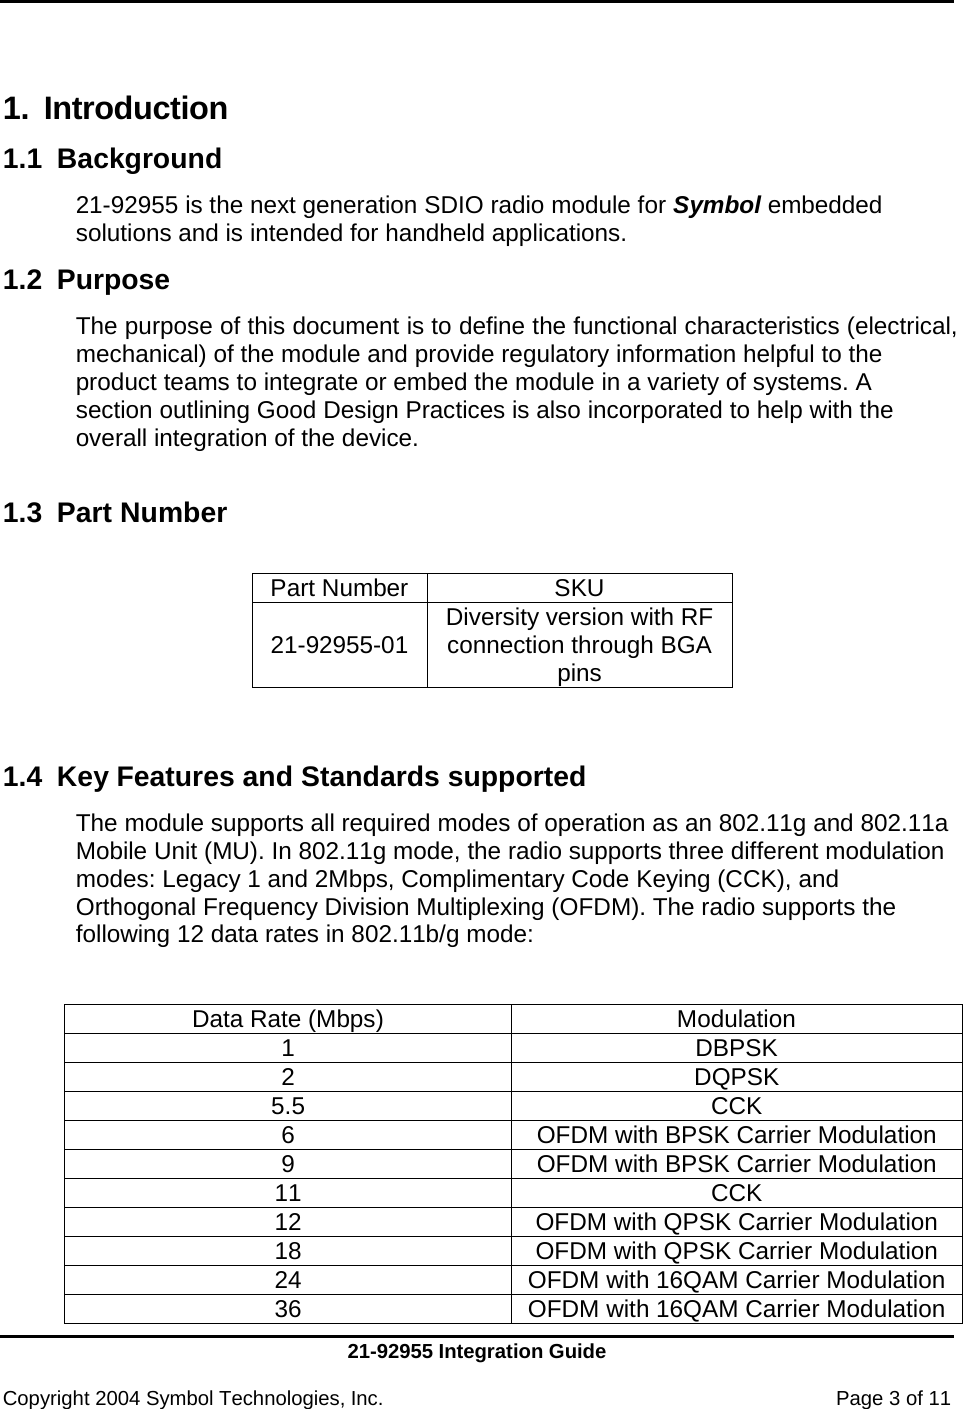     21-92955 Integration Guide  Copyright 2004 Symbol Technologies, Inc.    Page 3 of 11  1. Introduction 1.1 Background  21-92955 is the next generation SDIO radio module for Symbol embedded solutions and is intended for handheld applications. 1.2 Purpose  The purpose of this document is to define the functional characteristics (electrical, mechanical) of the module and provide regulatory information helpful to the product teams to integrate or embed the module in a variety of systems. A section outlining Good Design Practices is also incorporated to help with the overall integration of the device.  1.3  Part Number   Part Number SKU  21-92955-01 Diversity version with RF connection through BGA pins   1.4  Key Features and Standards supported The module supports all required modes of operation as an 802.11g and 802.11a Mobile Unit (MU). In 802.11g mode, the radio supports three different modulation modes: Legacy 1 and 2Mbps, Complimentary Code Keying (CCK), and Orthogonal Frequency Division Multiplexing (OFDM). The radio supports the following 12 data rates in 802.11b/g mode:   Data Rate (Mbps)  Modulation 1 DBPSK 2 DQPSK 5.5 CCK 6  OFDM with BPSK Carrier Modulation 9  OFDM with BPSK Carrier Modulation 11 CCK 12  OFDM with QPSK Carrier Modulation 18  OFDM with QPSK Carrier Modulation 24  OFDM with 16QAM Carrier Modulation36  OFDM with 16QAM Carrier Modulation